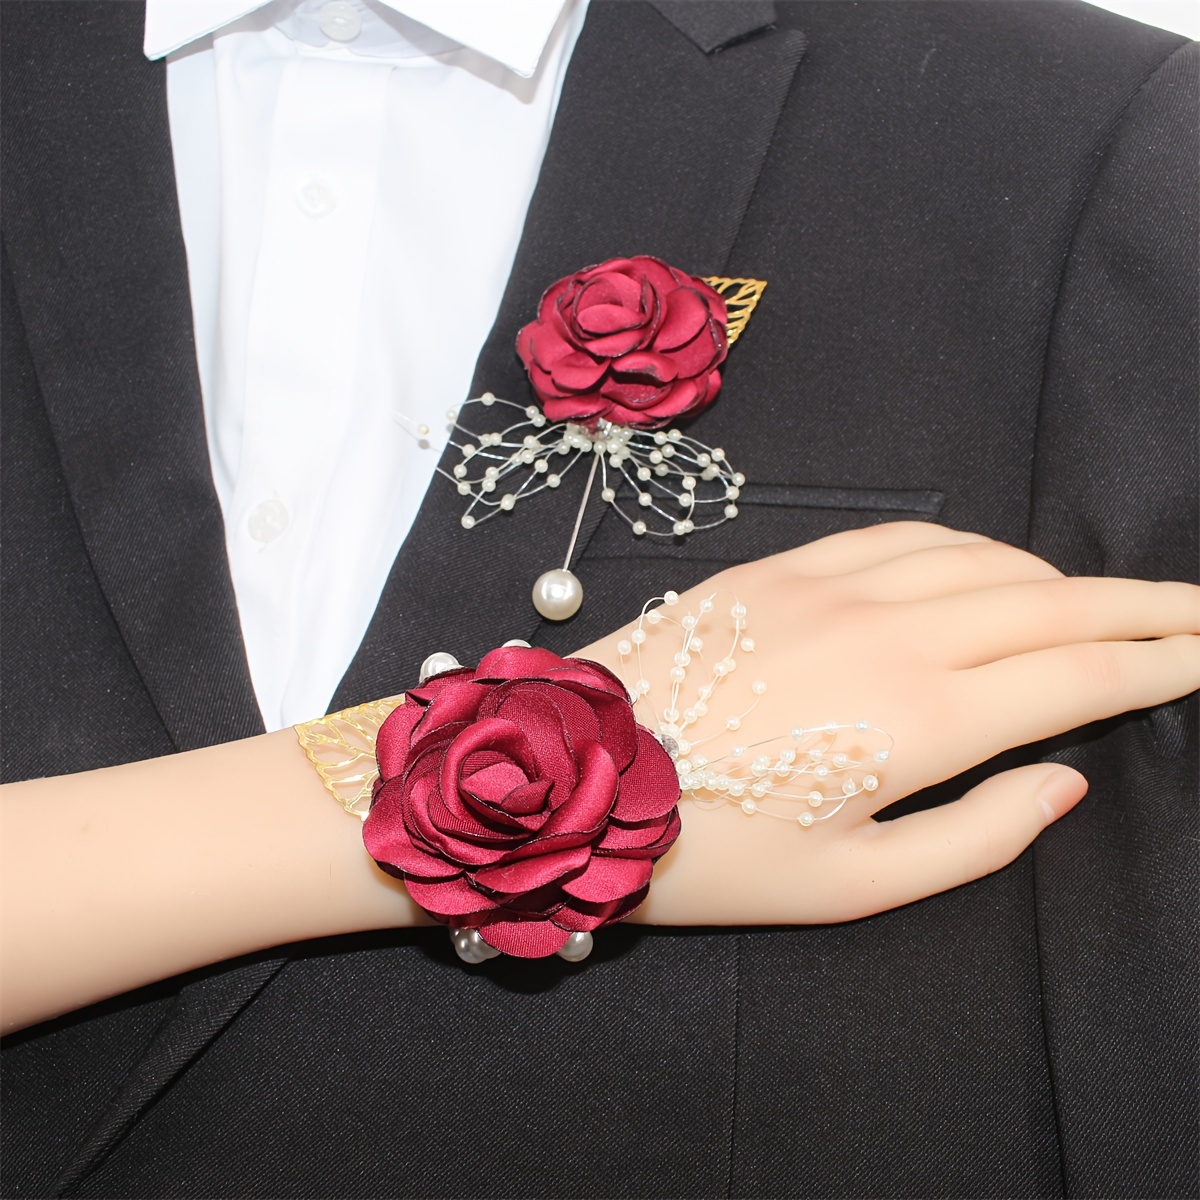 

2pcs Wrist Corsage And Boutonniere Set, Artificial Rose Faux Pearls Bridal Bridesmaid Wrist Corsage Flower, Groom Best Man Boutonniere Wedding Prom Party Engagement Ceremony Anniversary Decor